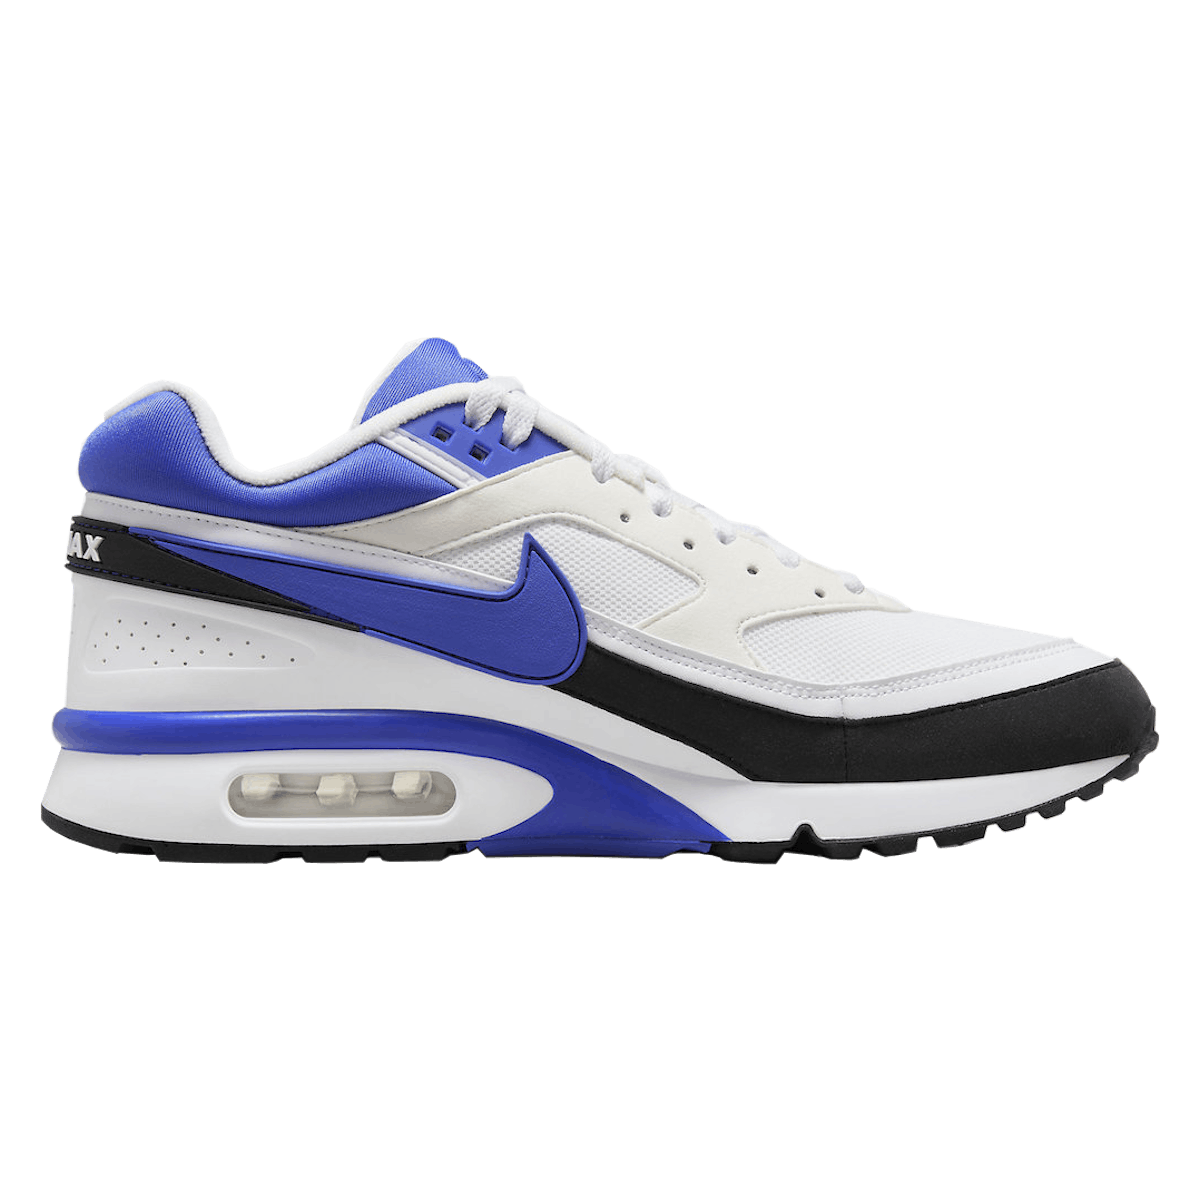 Nike Air Max BW "White and Persian Violet"